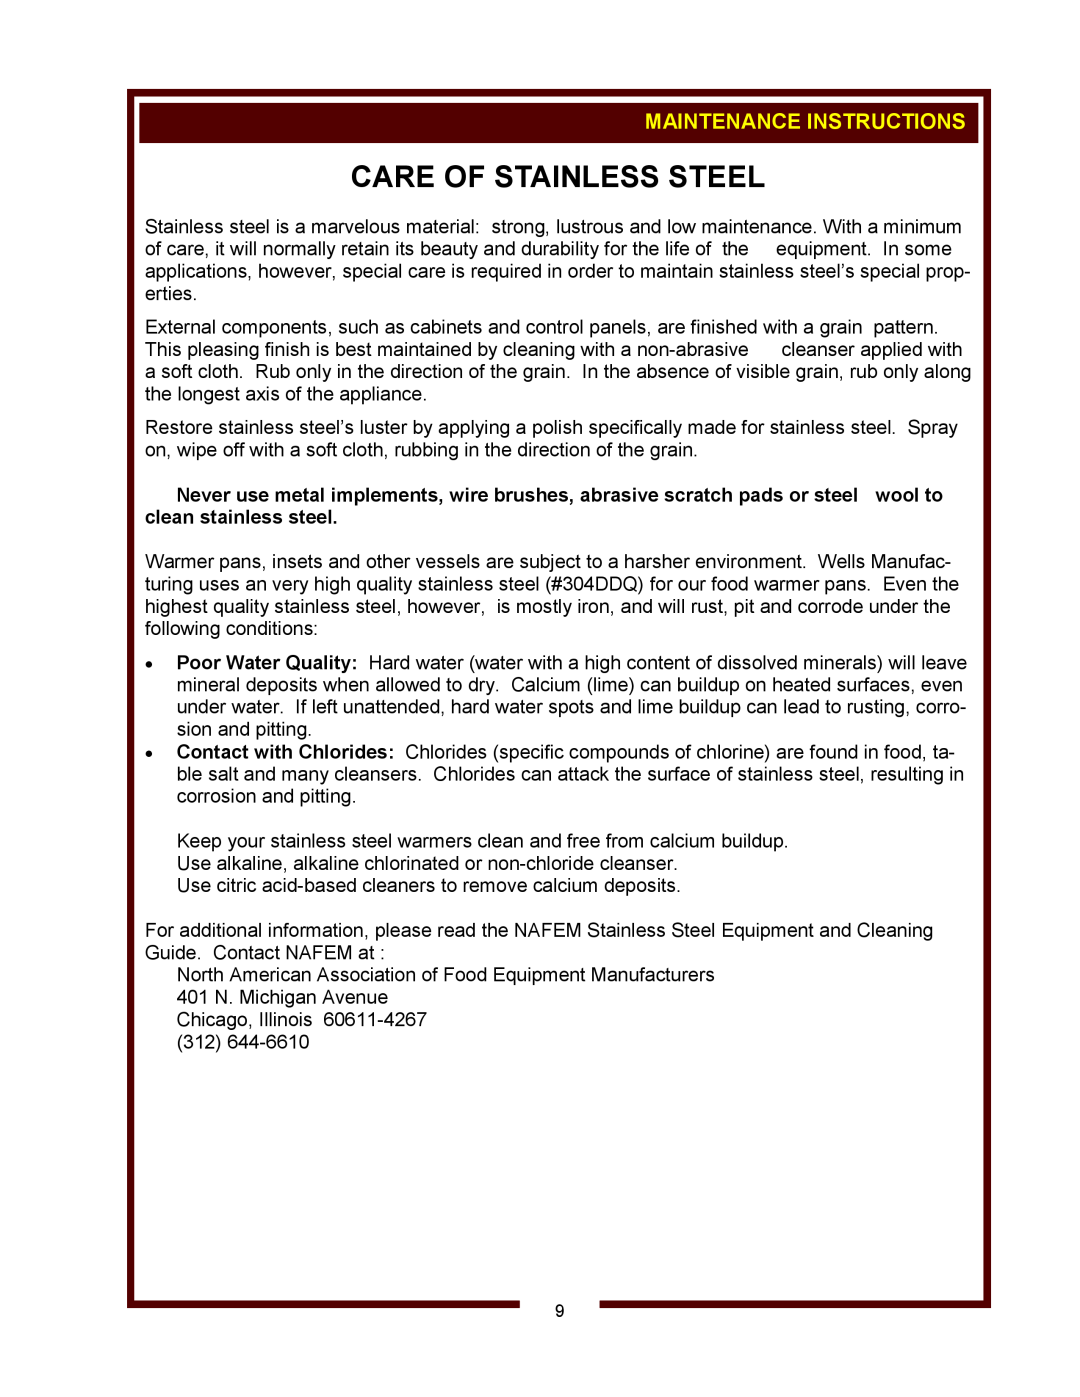 Wells HW-10, HW-SMP operation manual Maintenance Instructions, Care Of Stainless Steel 